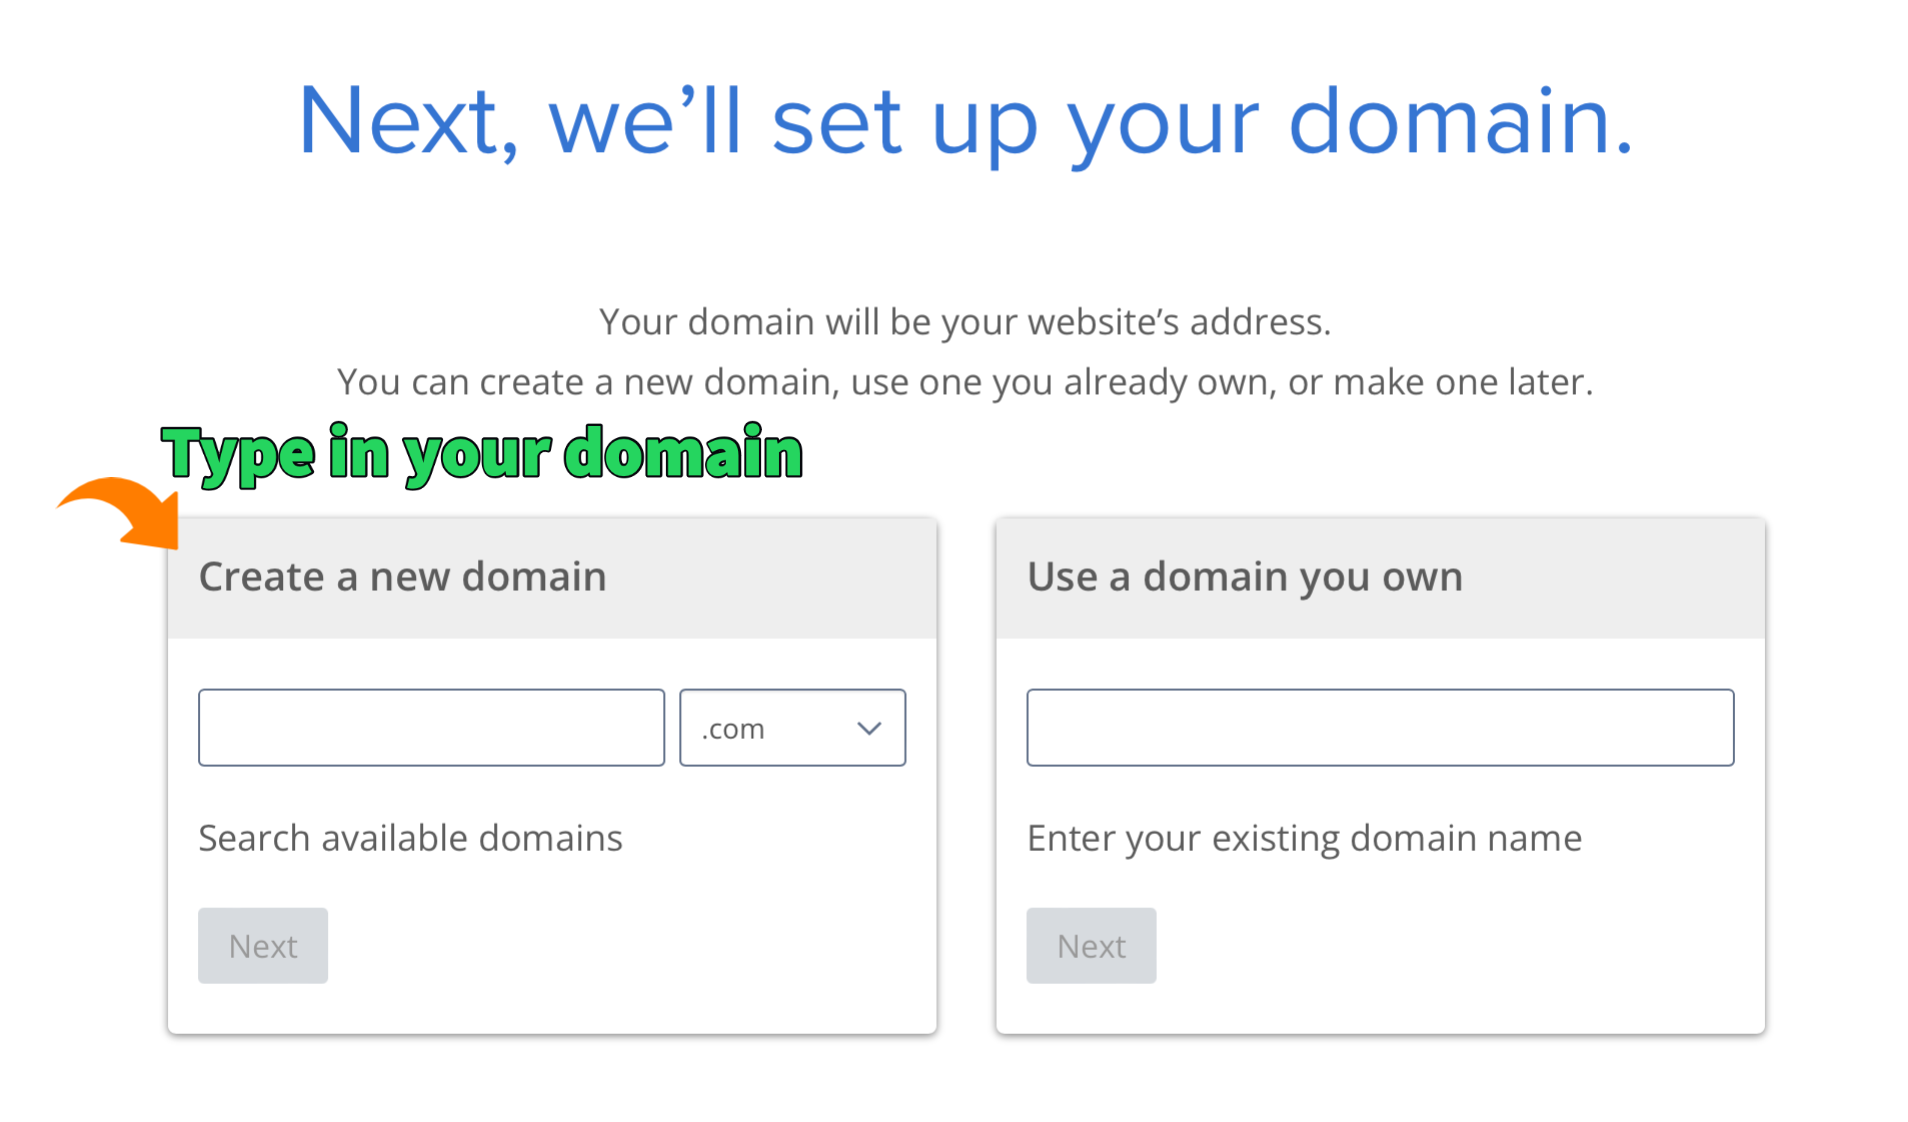 How to set up your domain